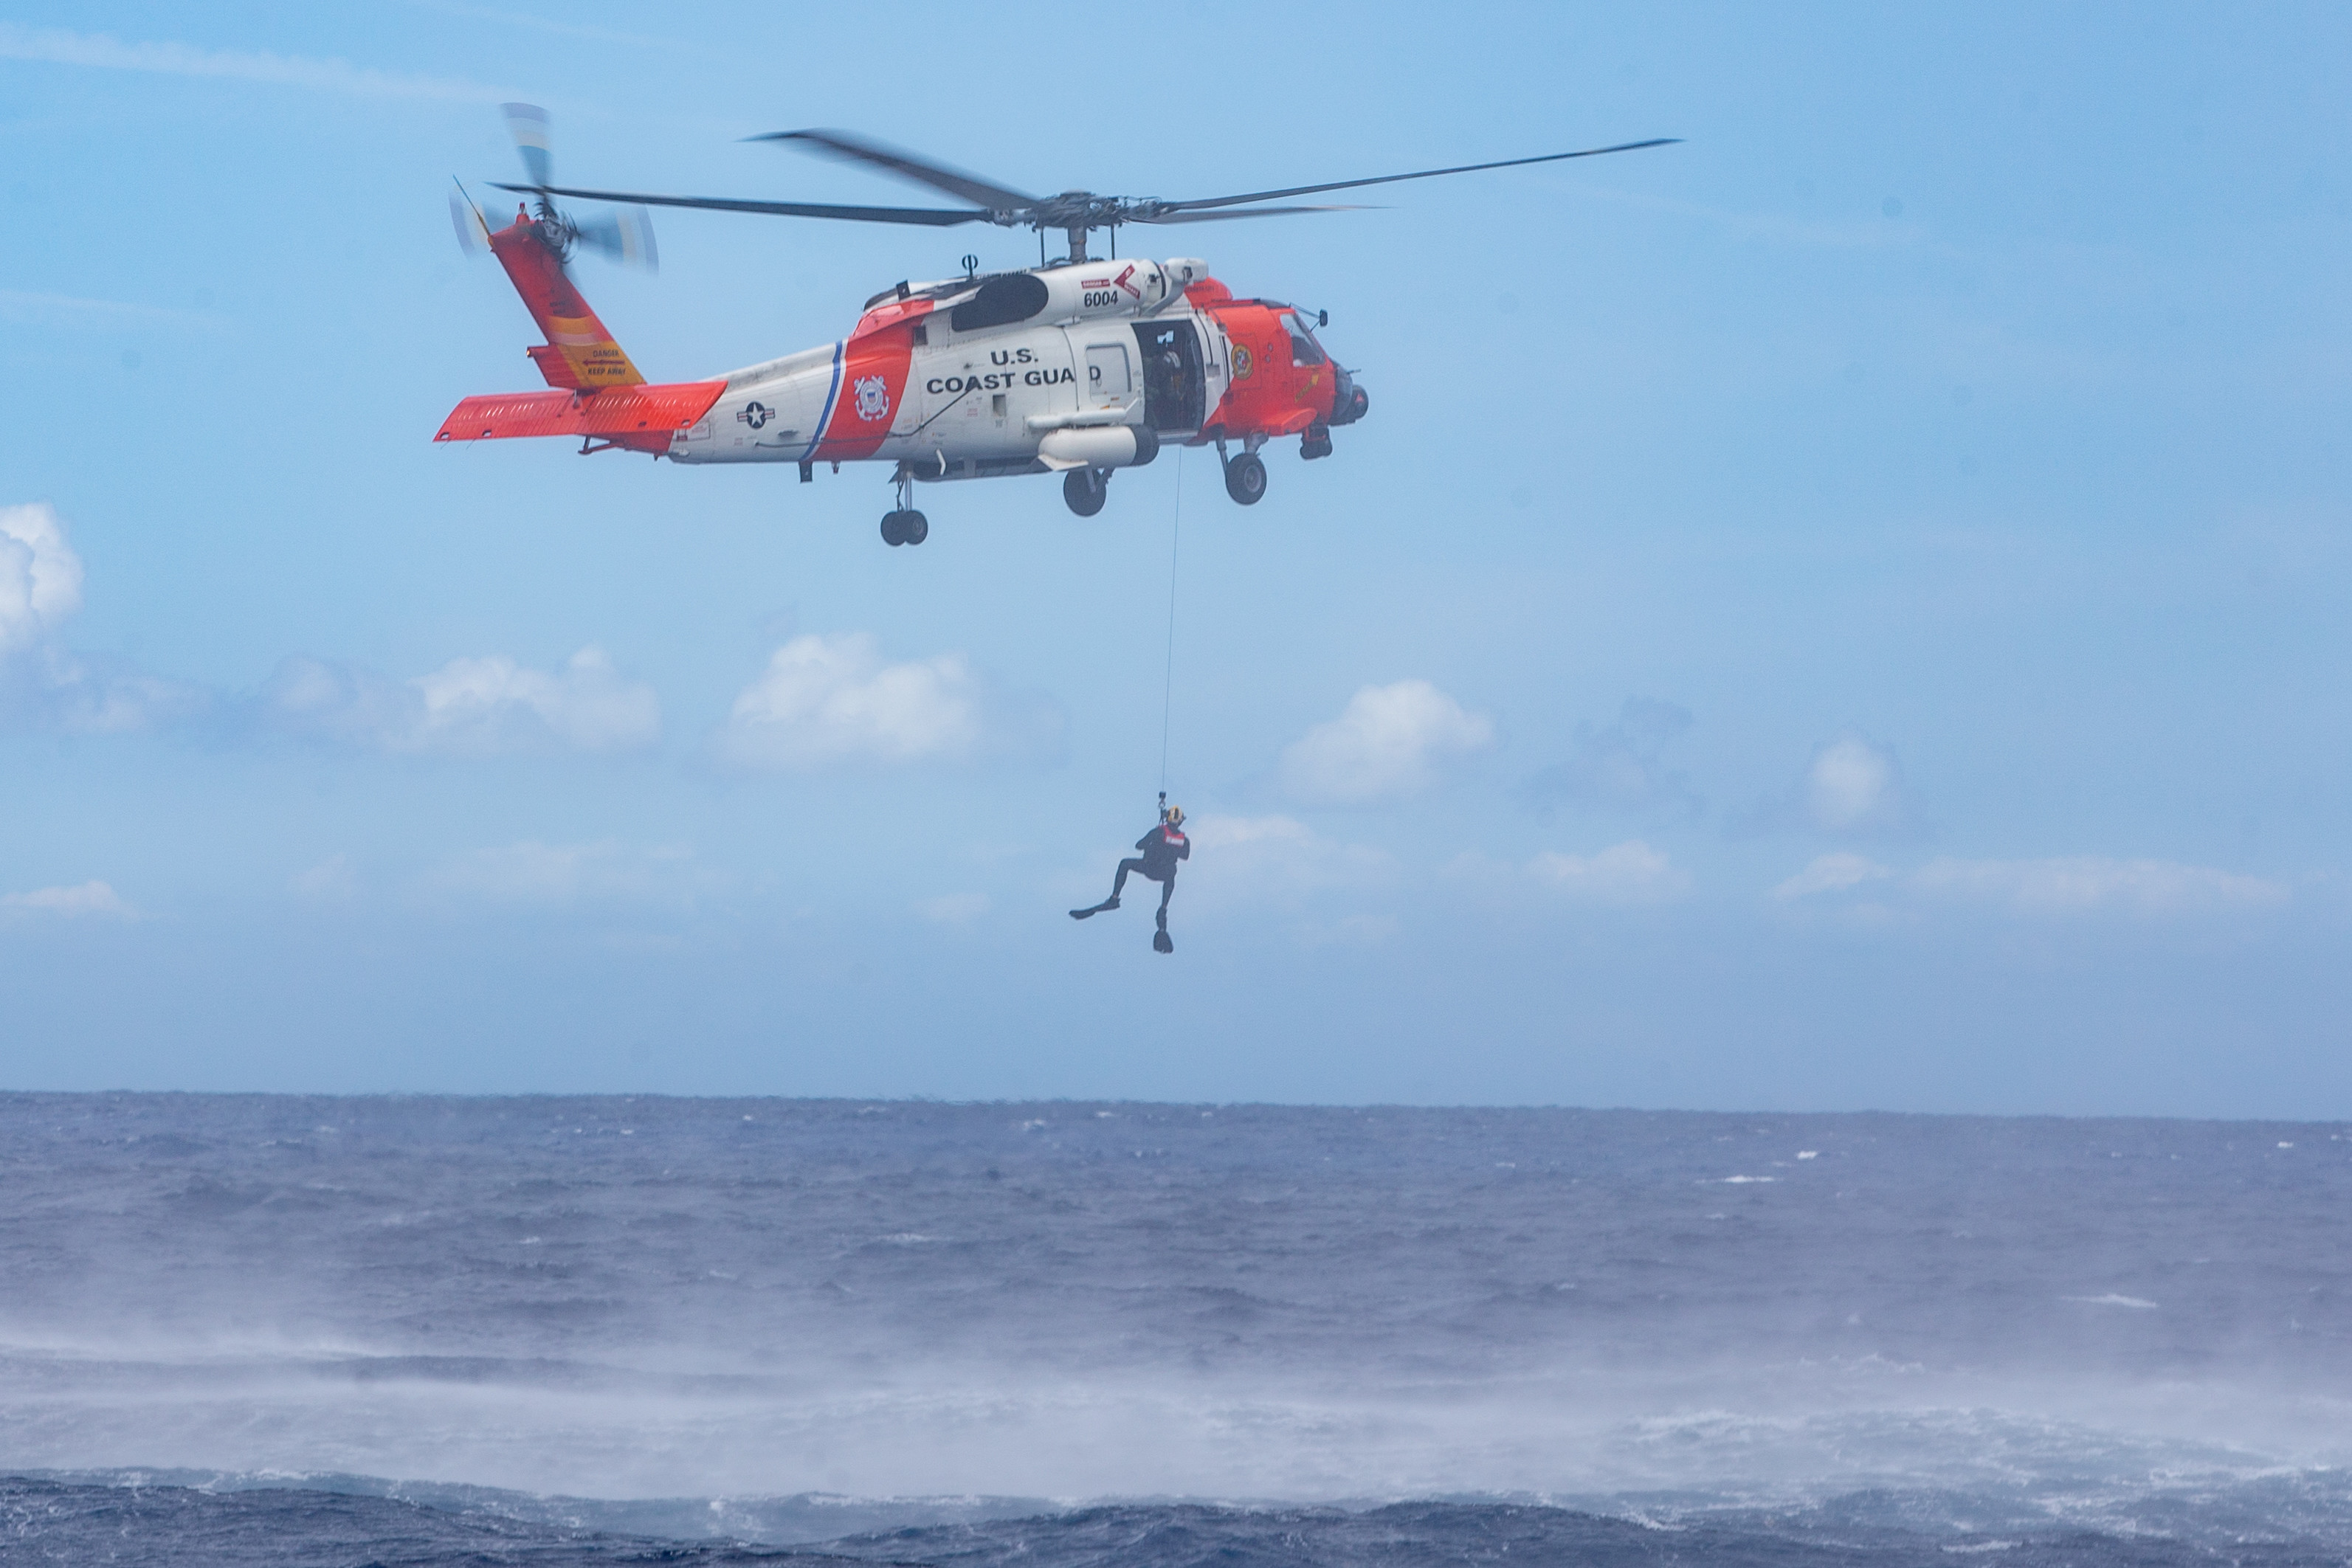 Joint Coast Guard Military Search And Rescue Exercise In Mid Atlantic Tuesday